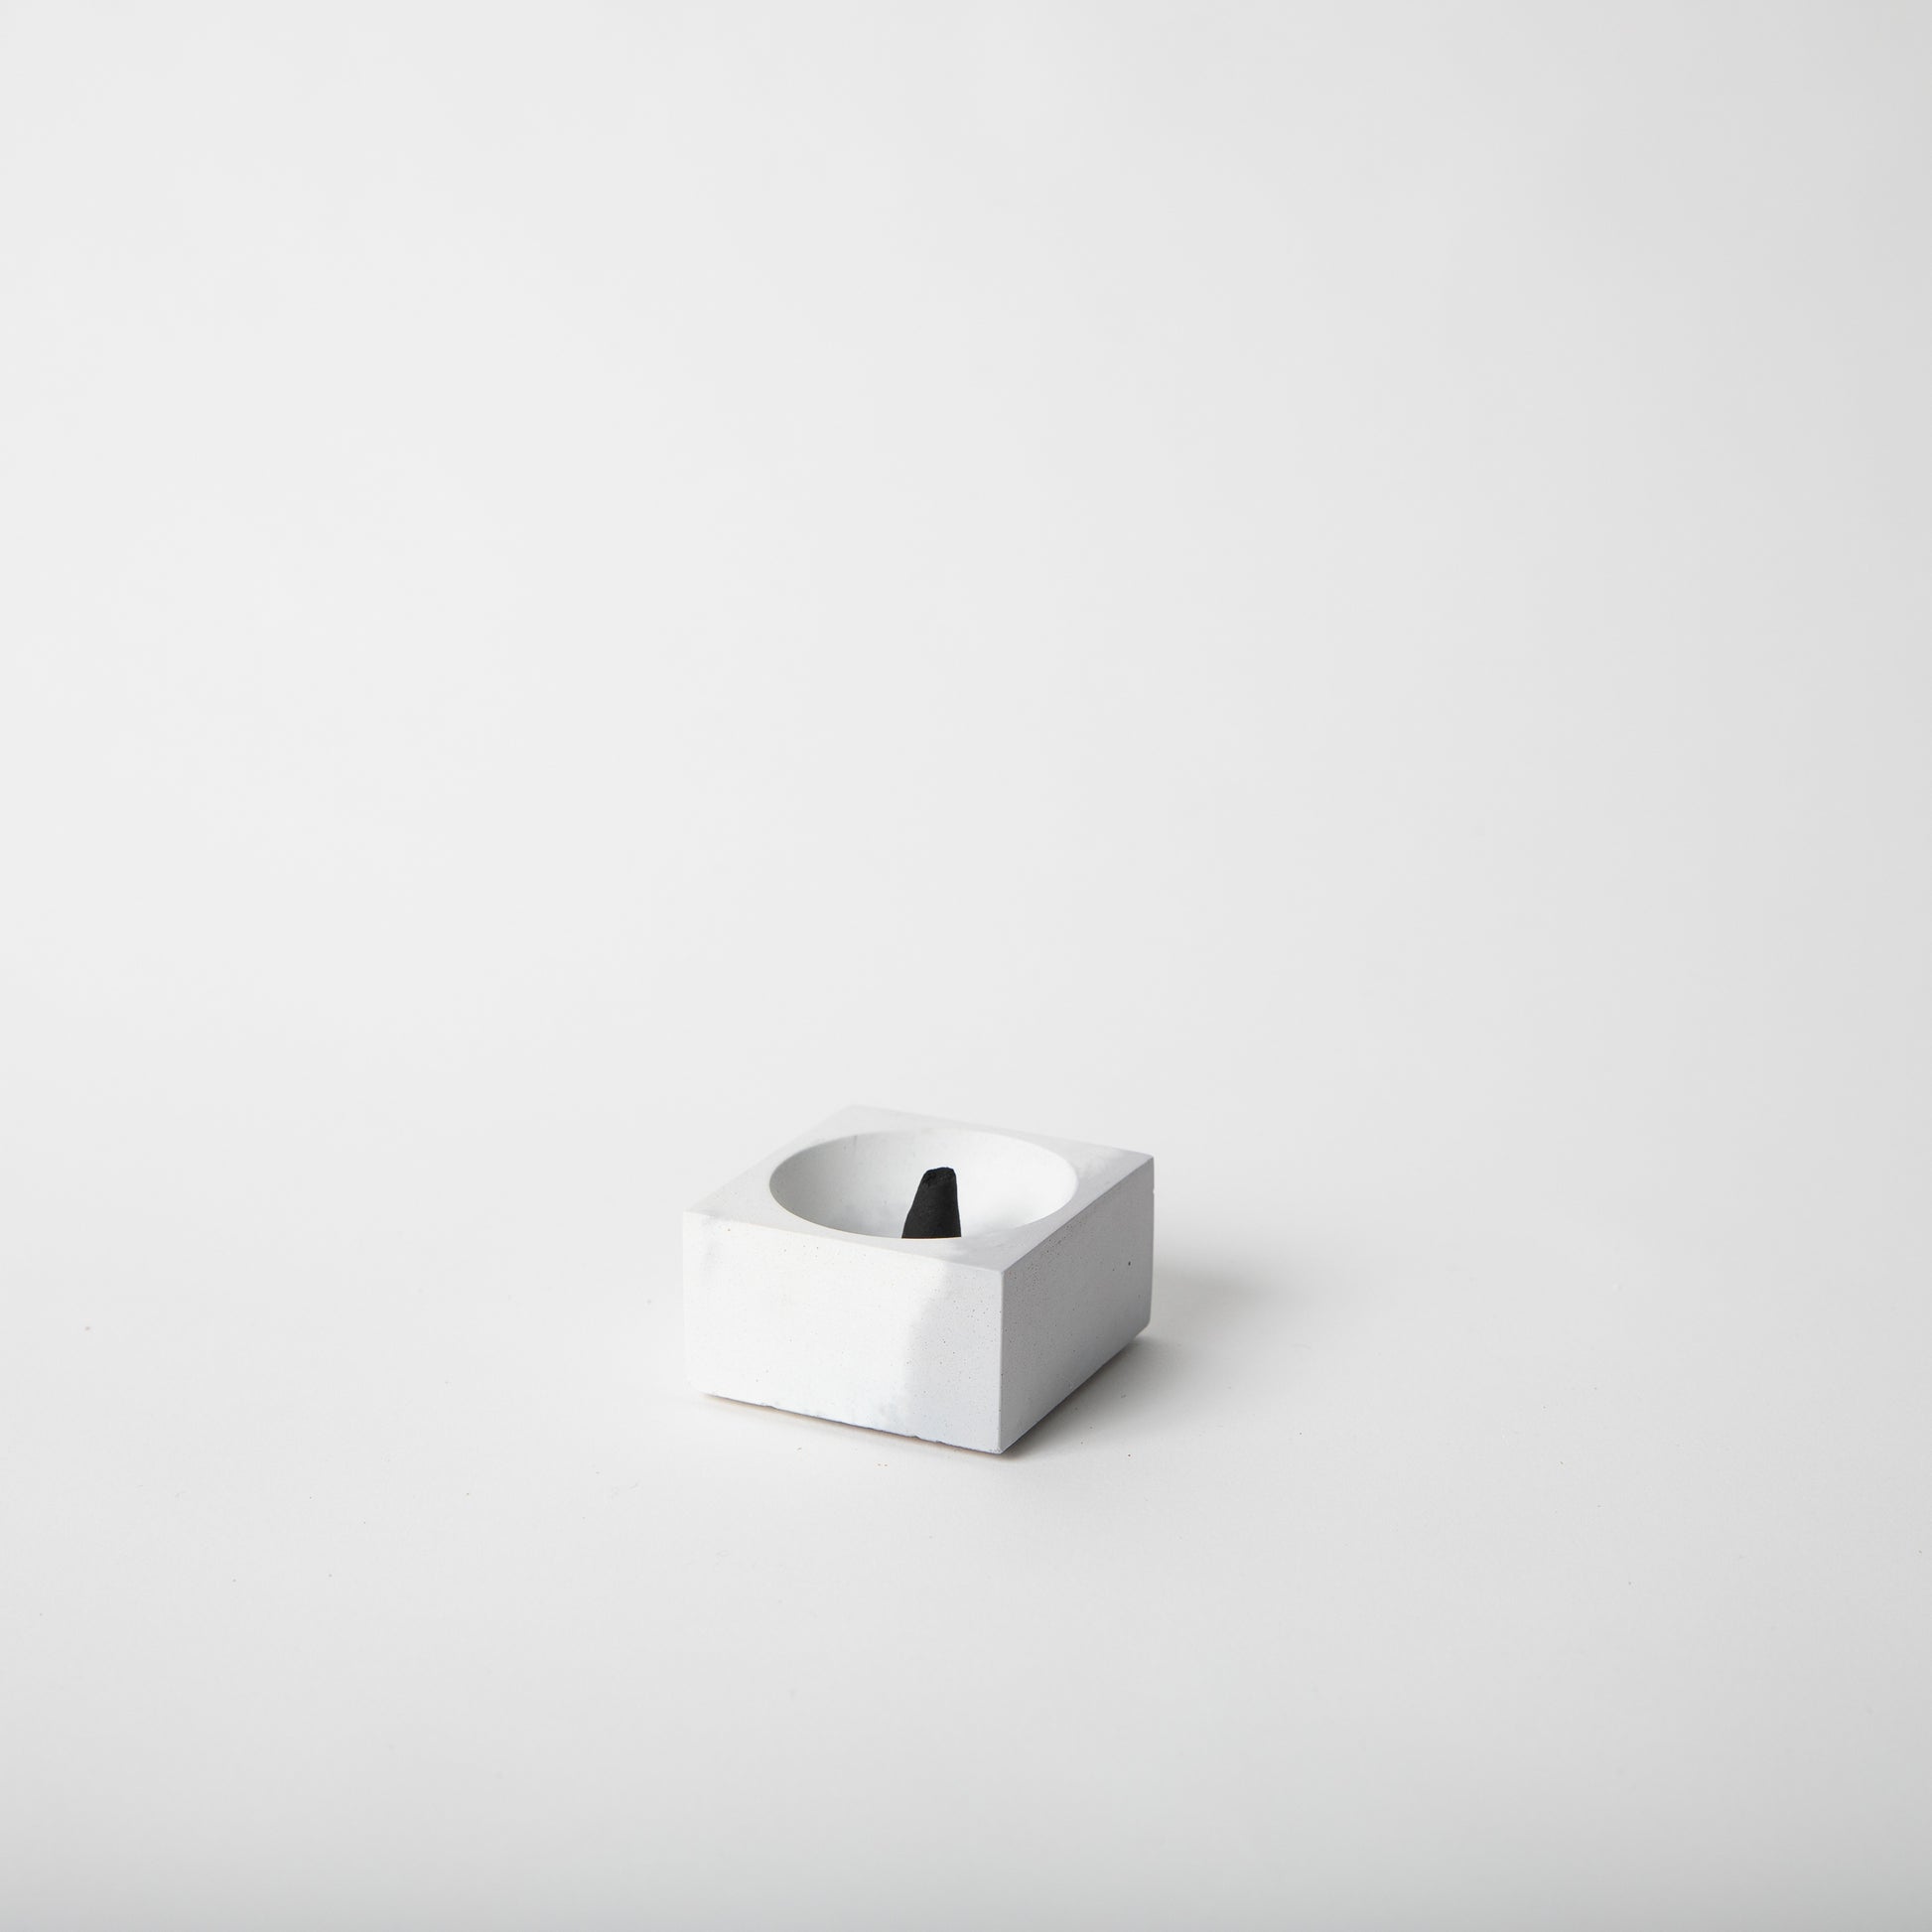 Square concrete incense holder in grey and white with incense cone.